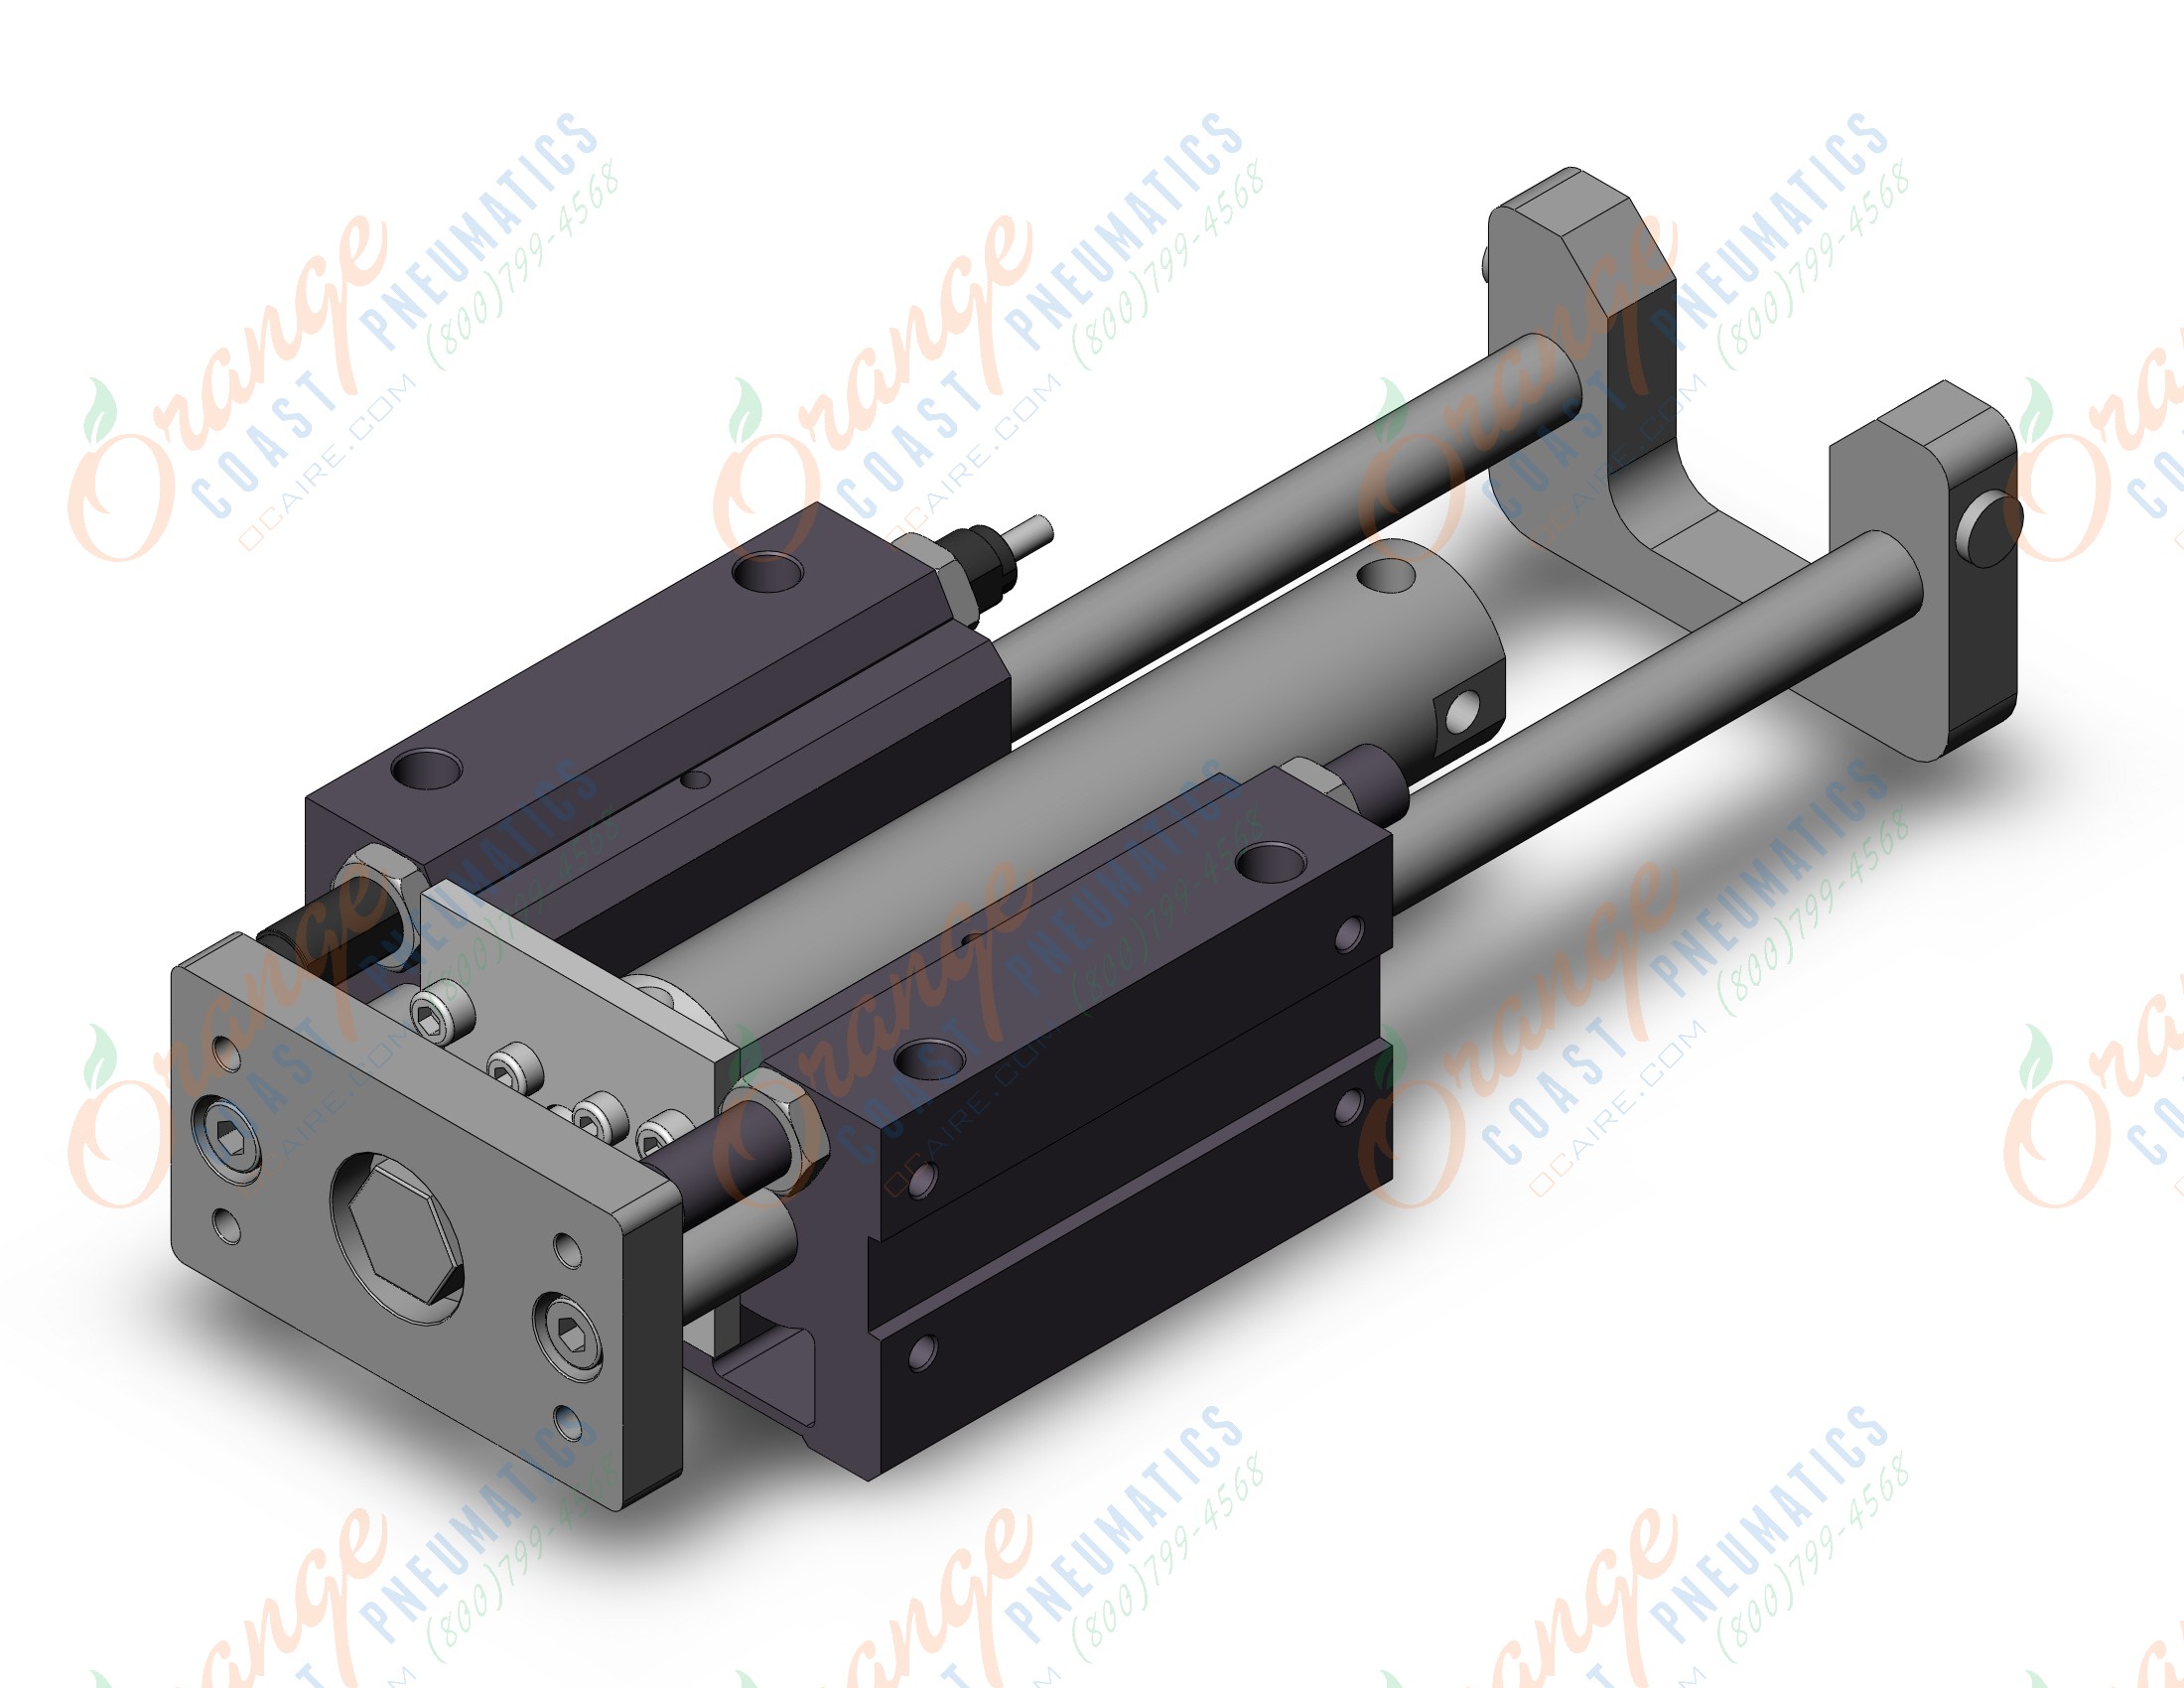 SMC MGGLB32TF-125 mgg, guide cylinder, GUIDED CYLINDER